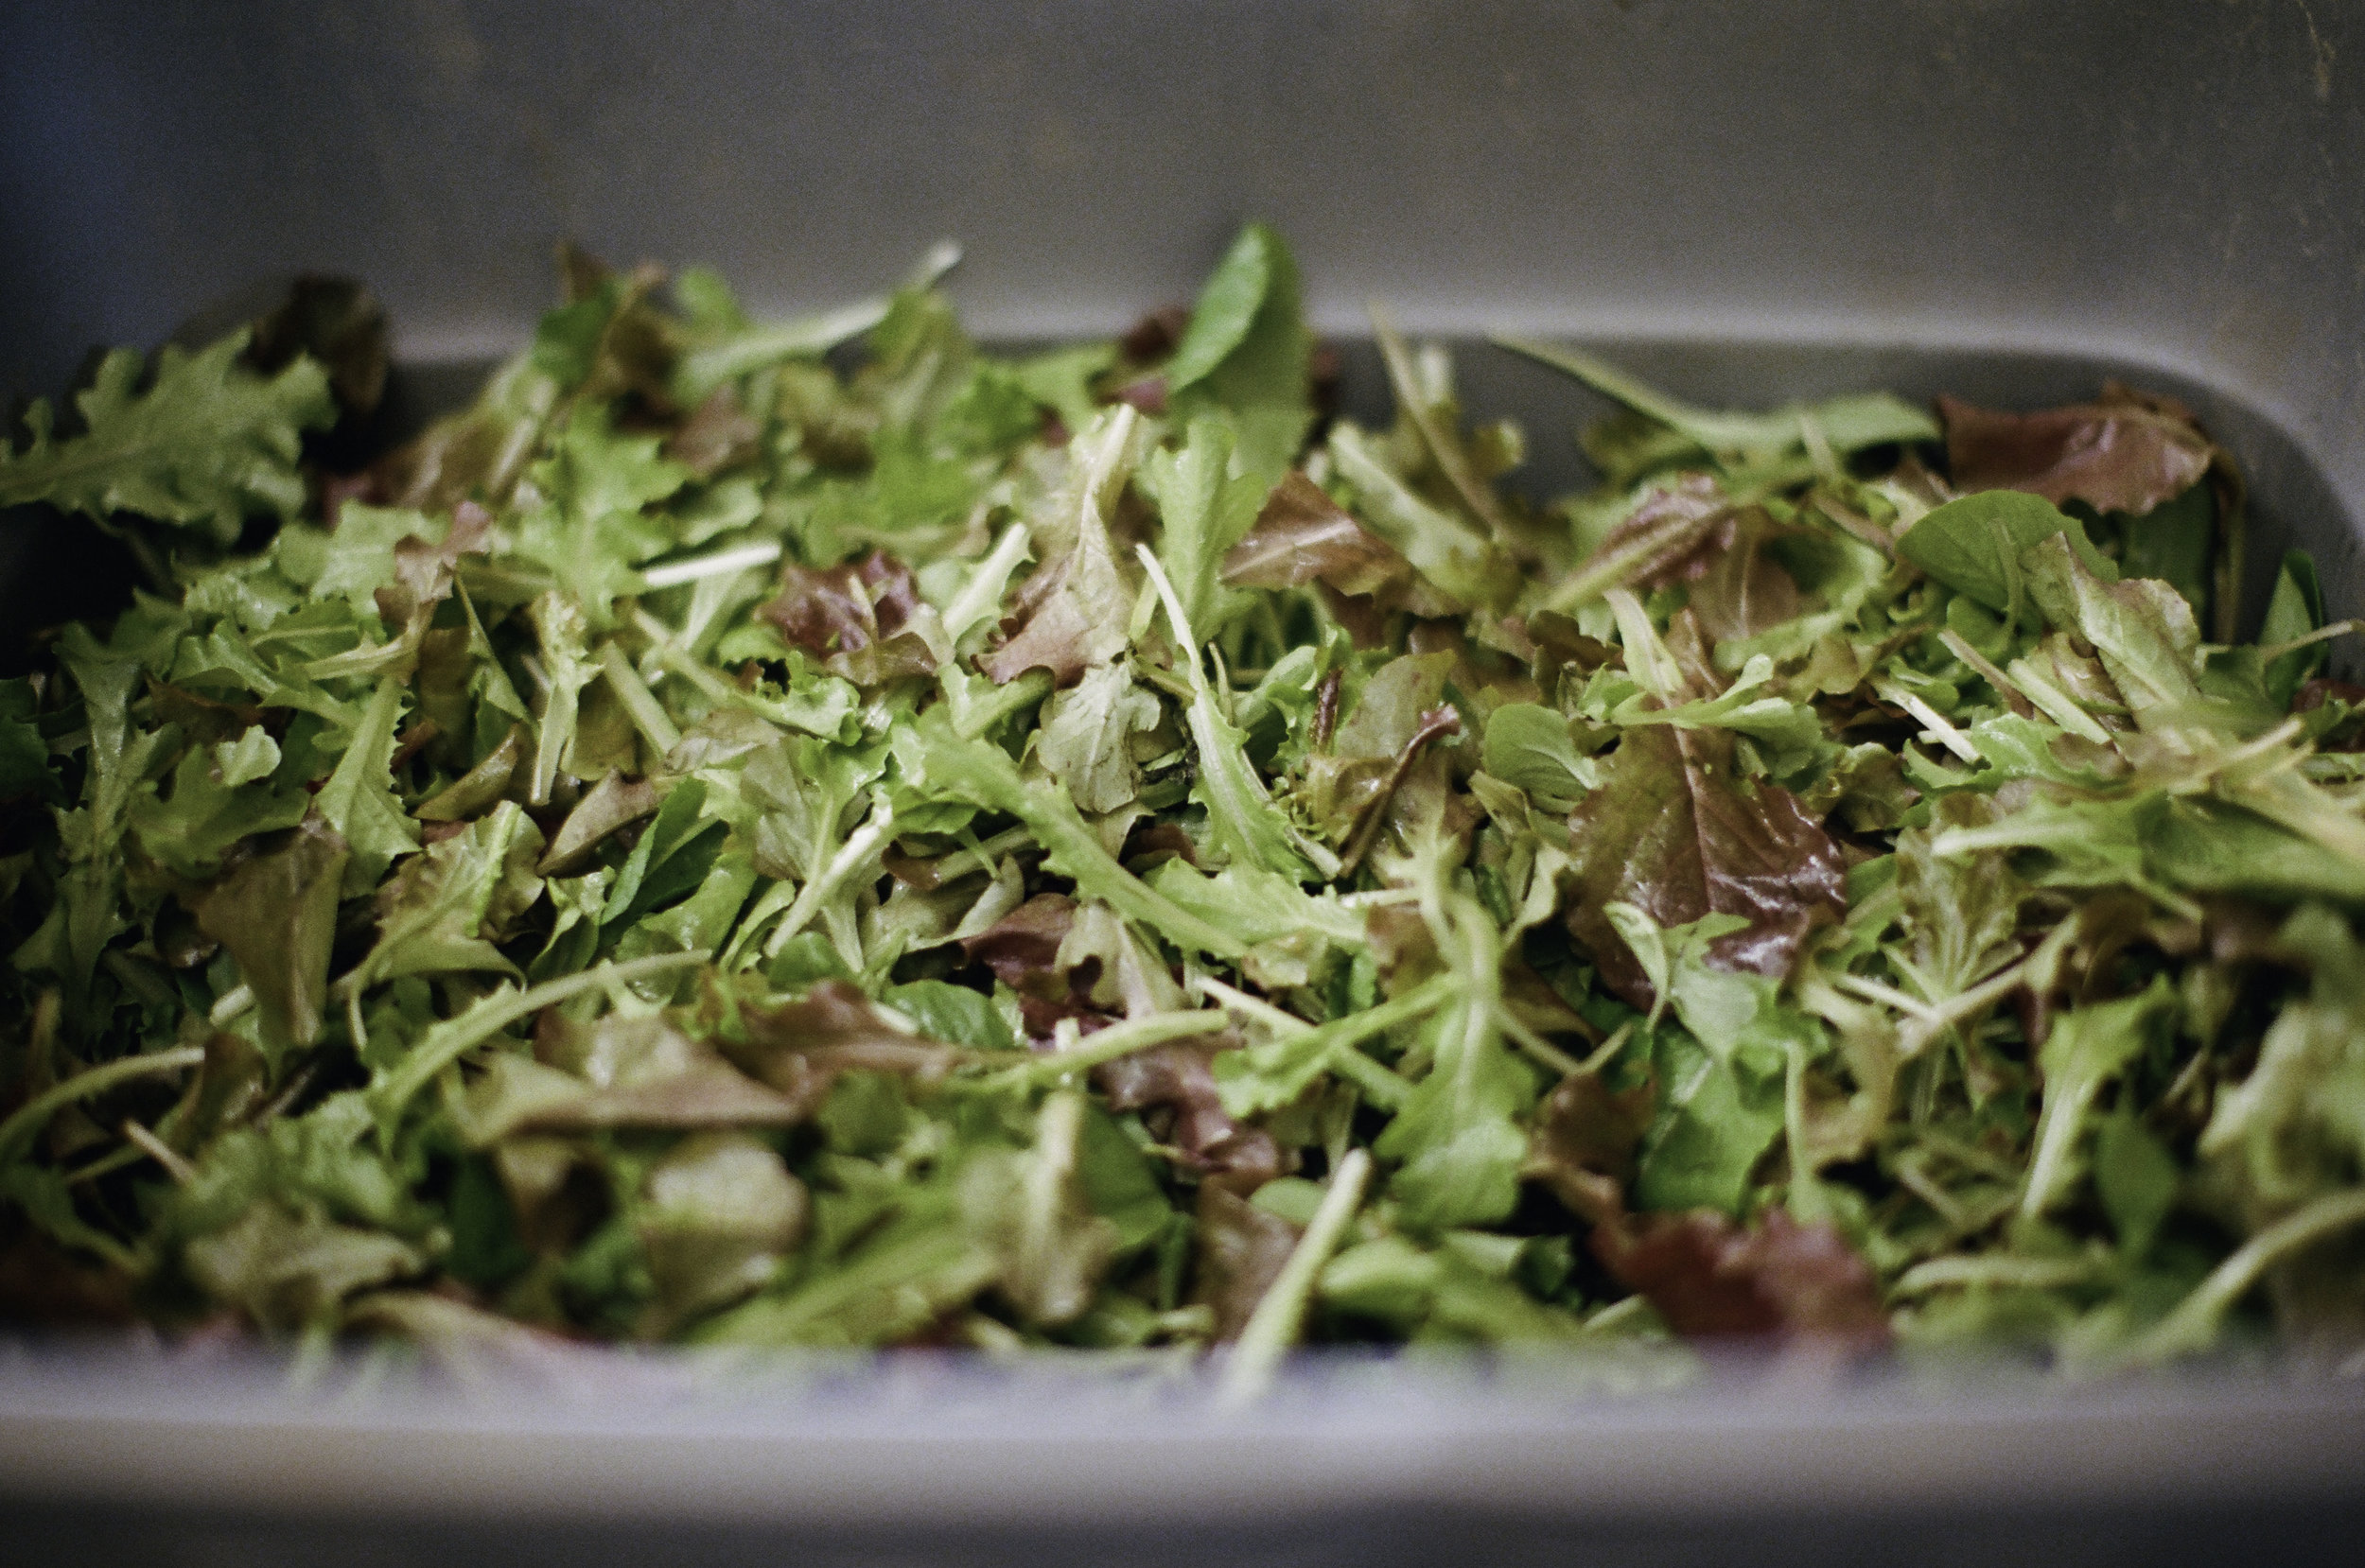  Harvested baby lettuce ready to be washed, &nbsp;packed &nbsp;and delivered. 